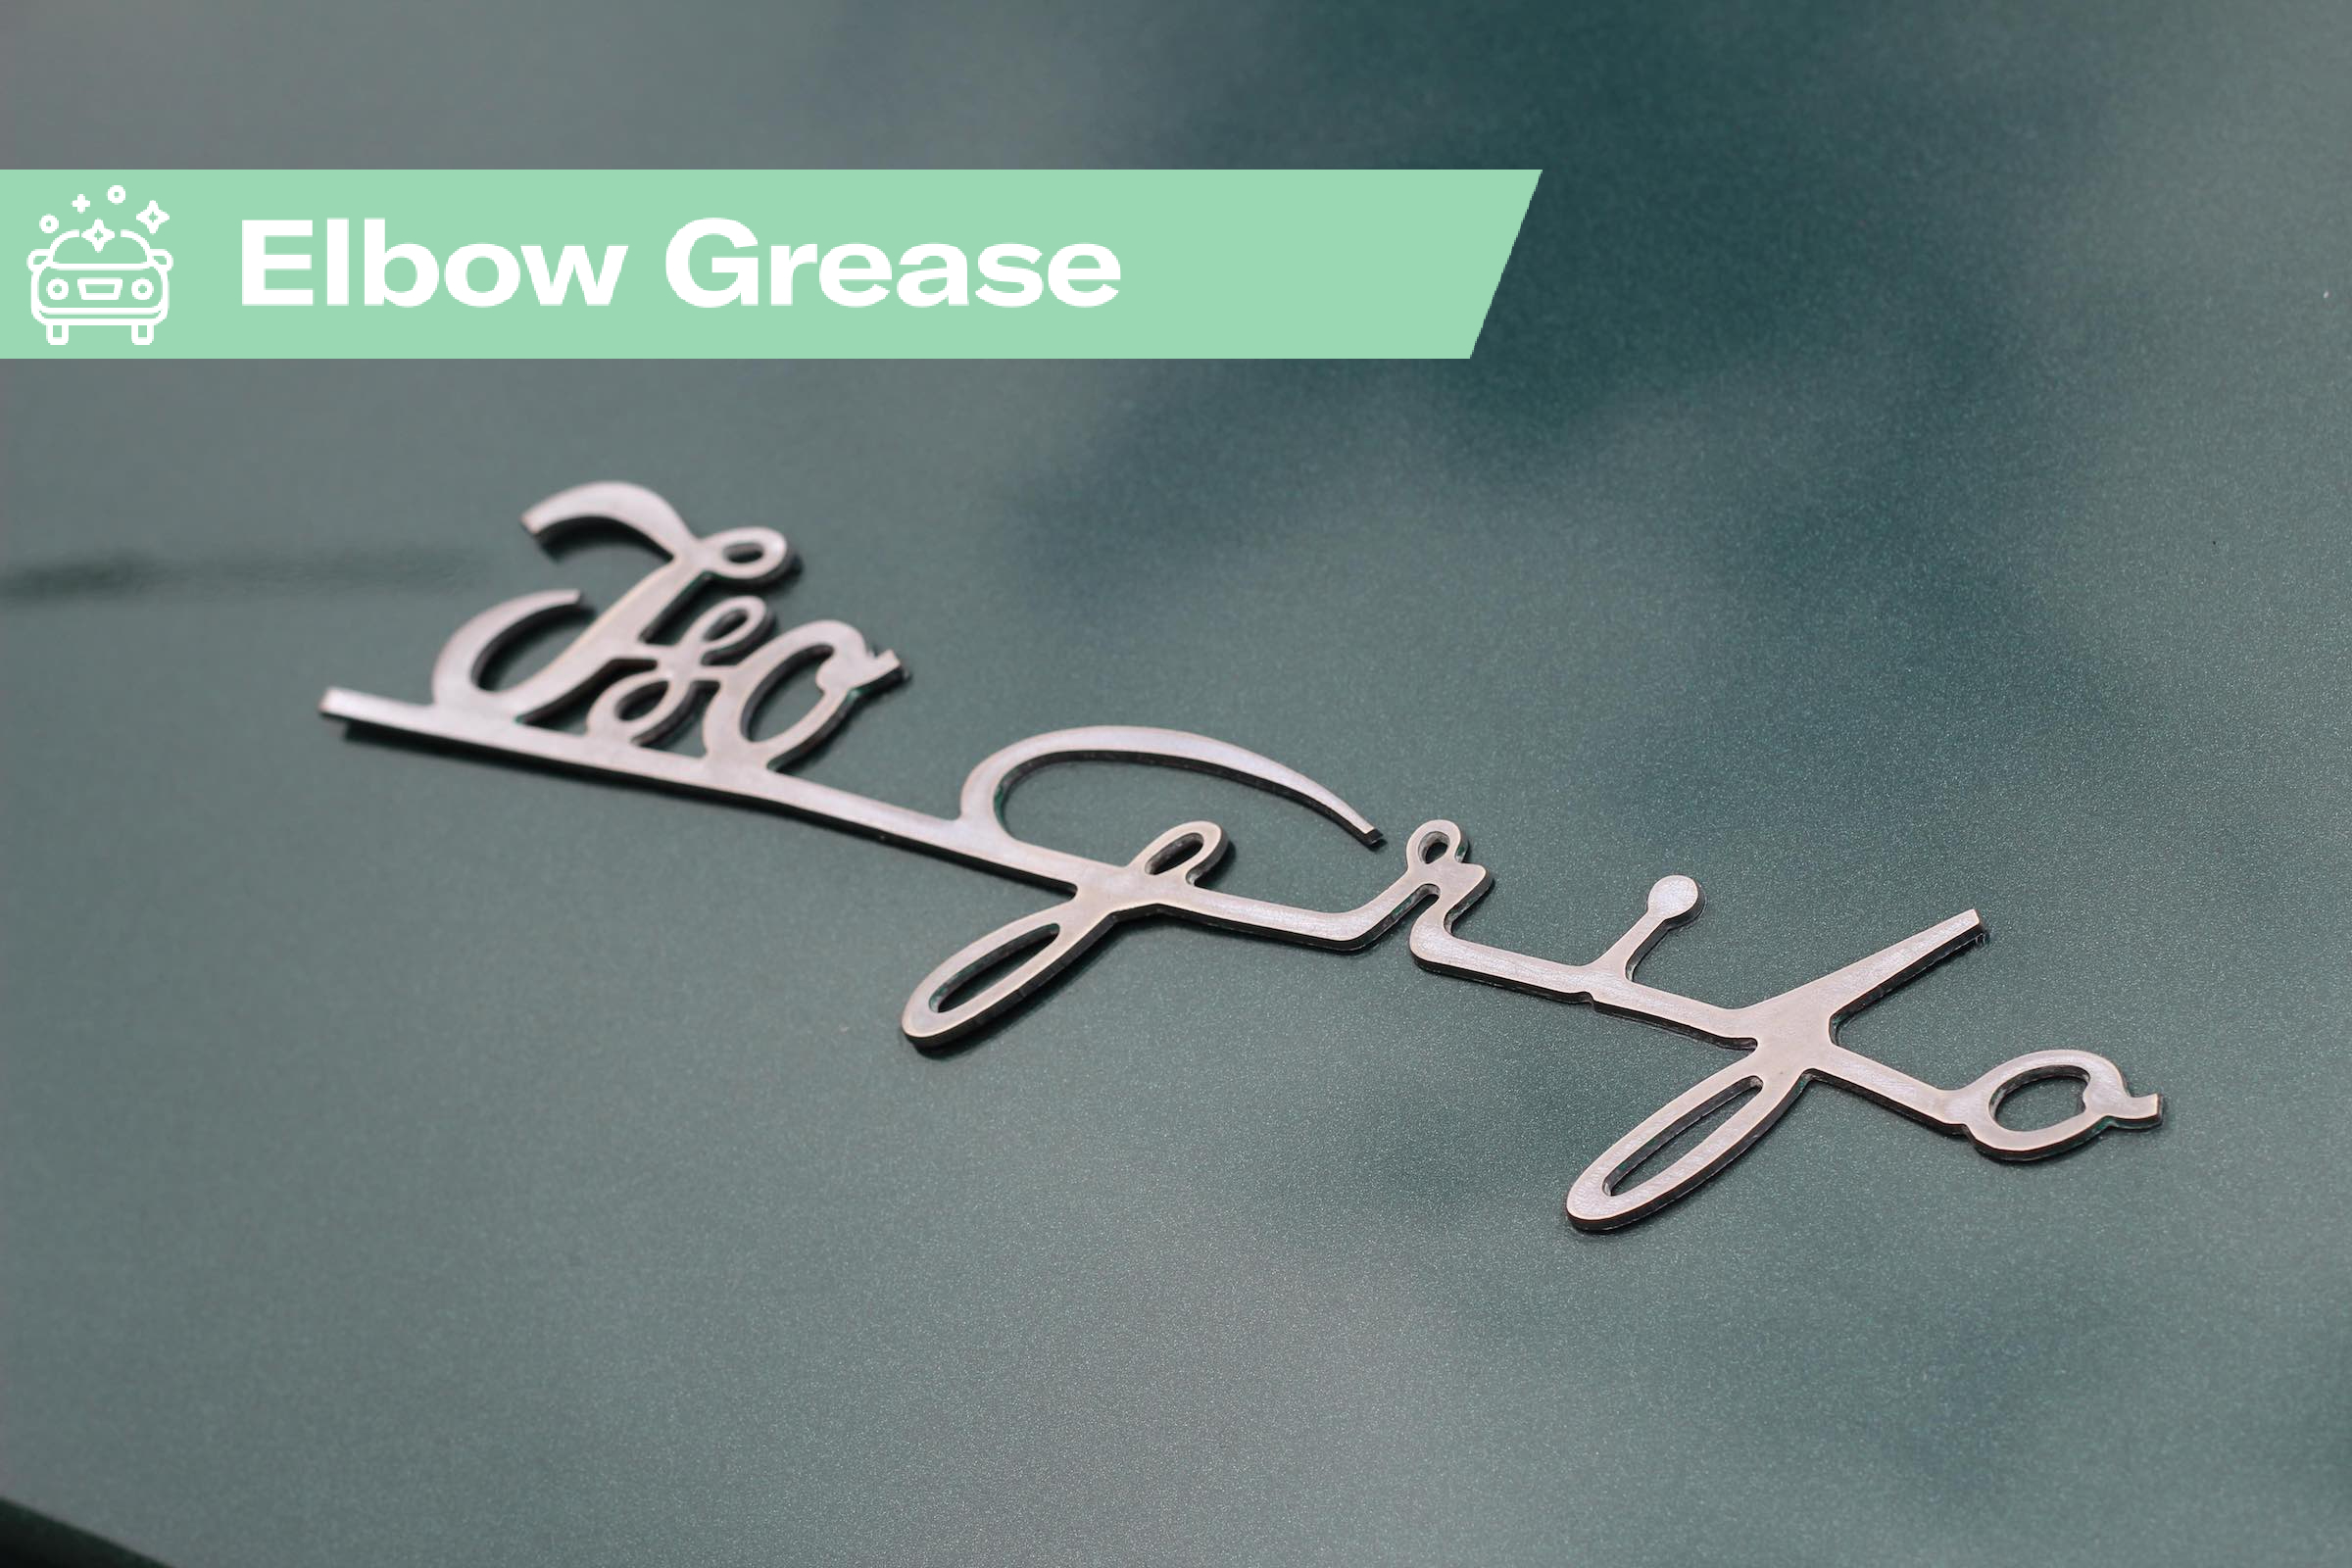 Elbow Grease: Preparing your car for a concours event